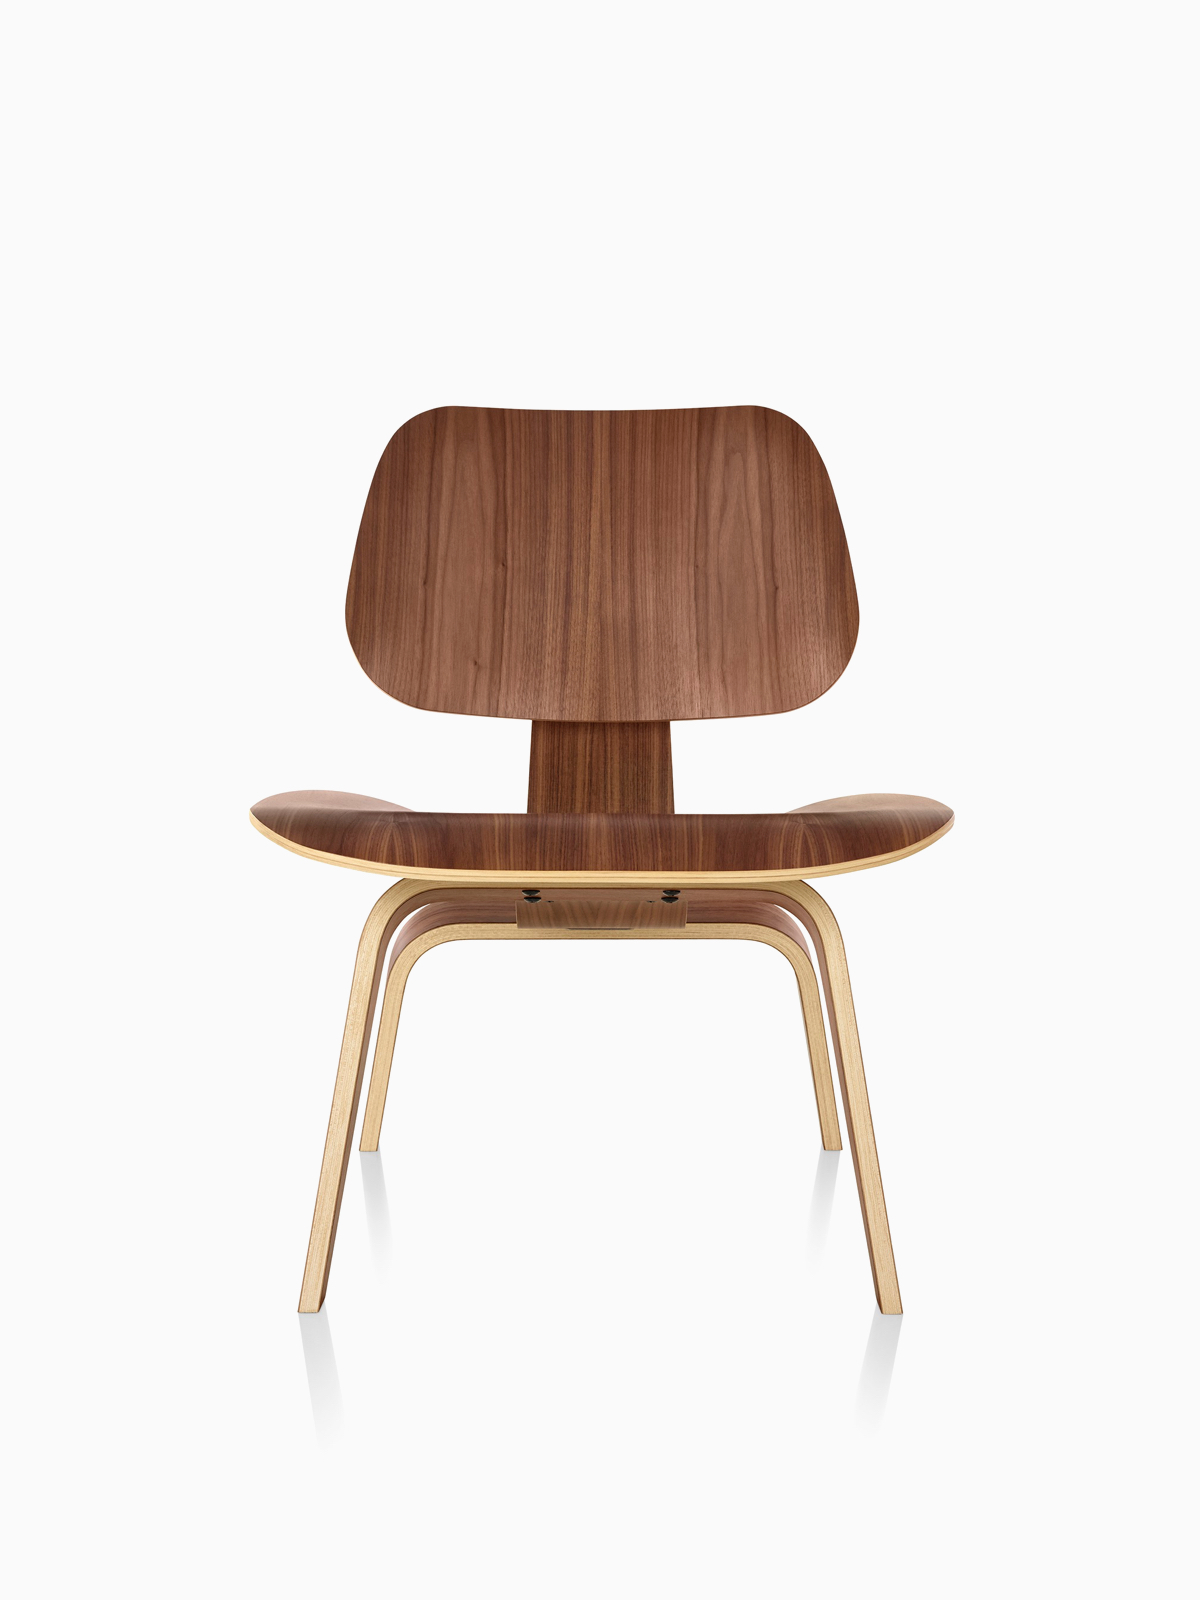 Eames Moulded Plywood Chairs